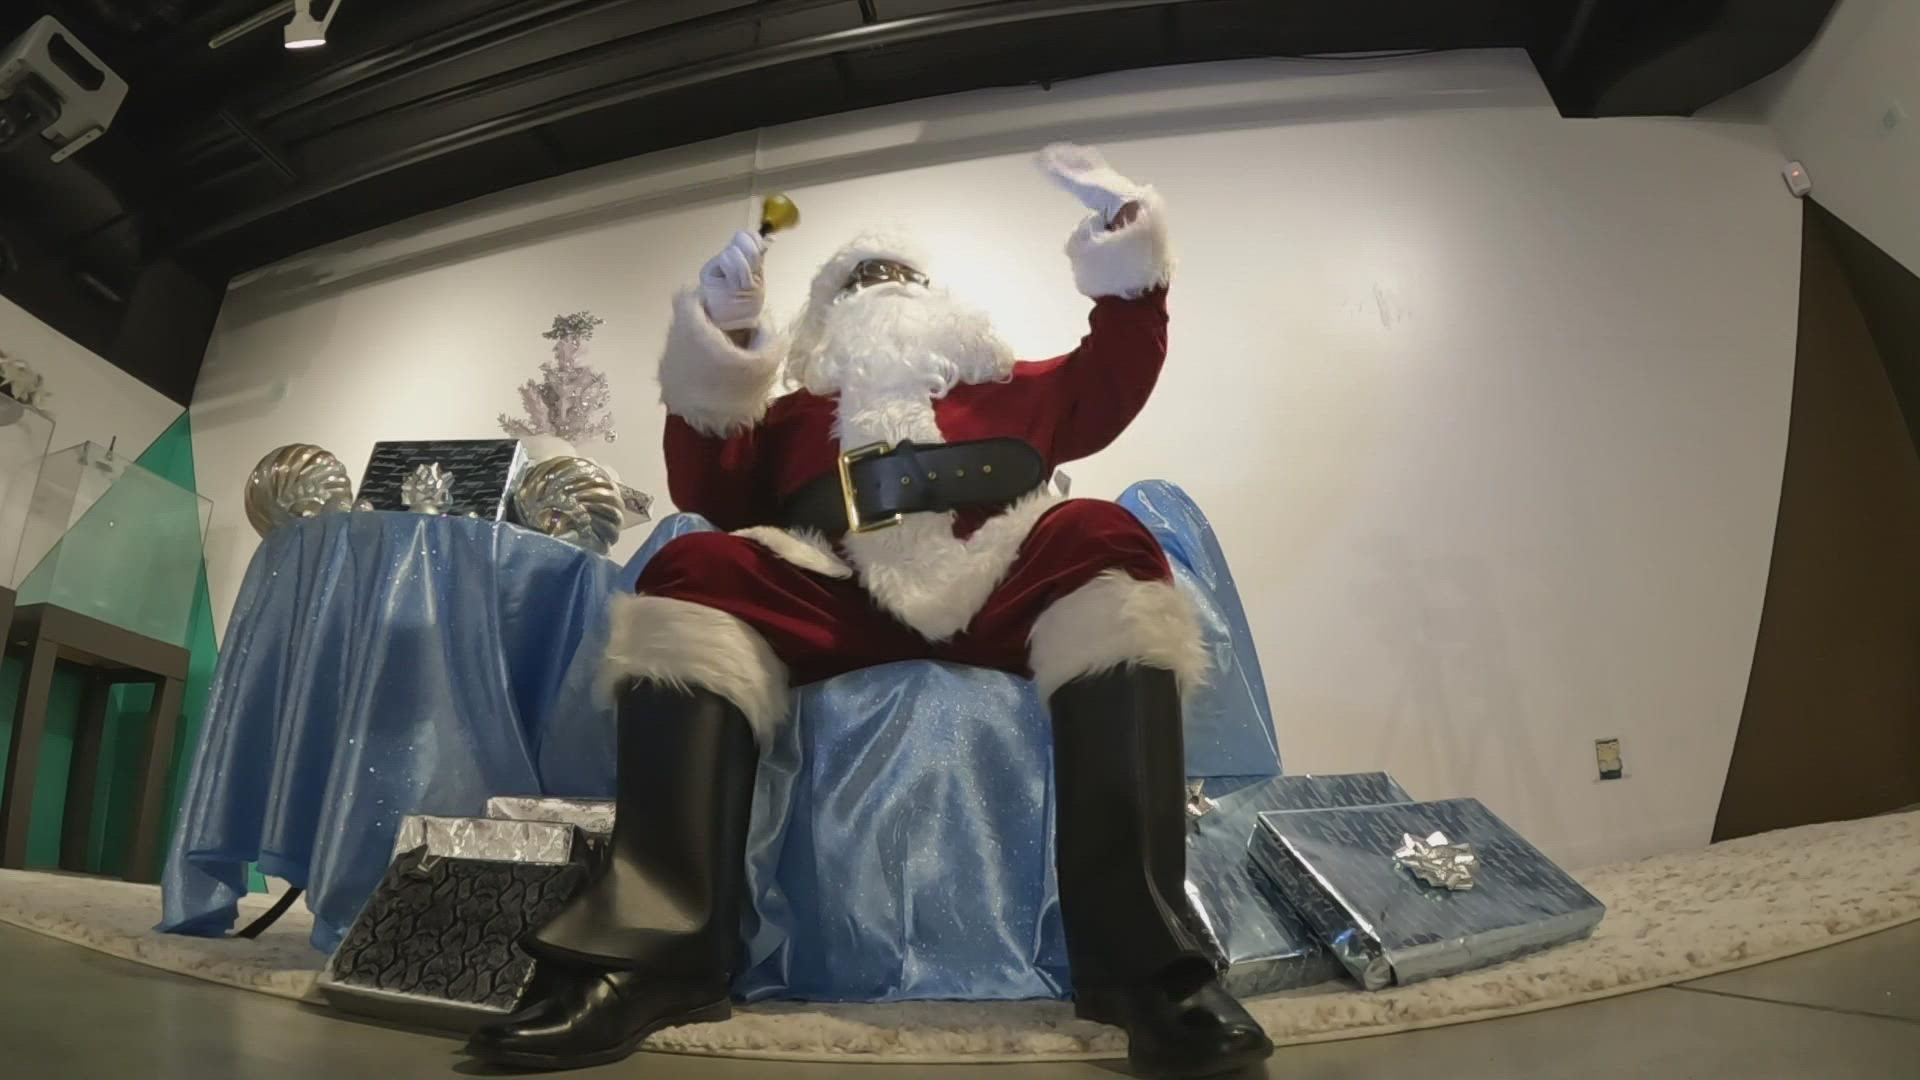 The Northwest African American Museum arranged virtual visits between Black Santa and kids eager to meet him.